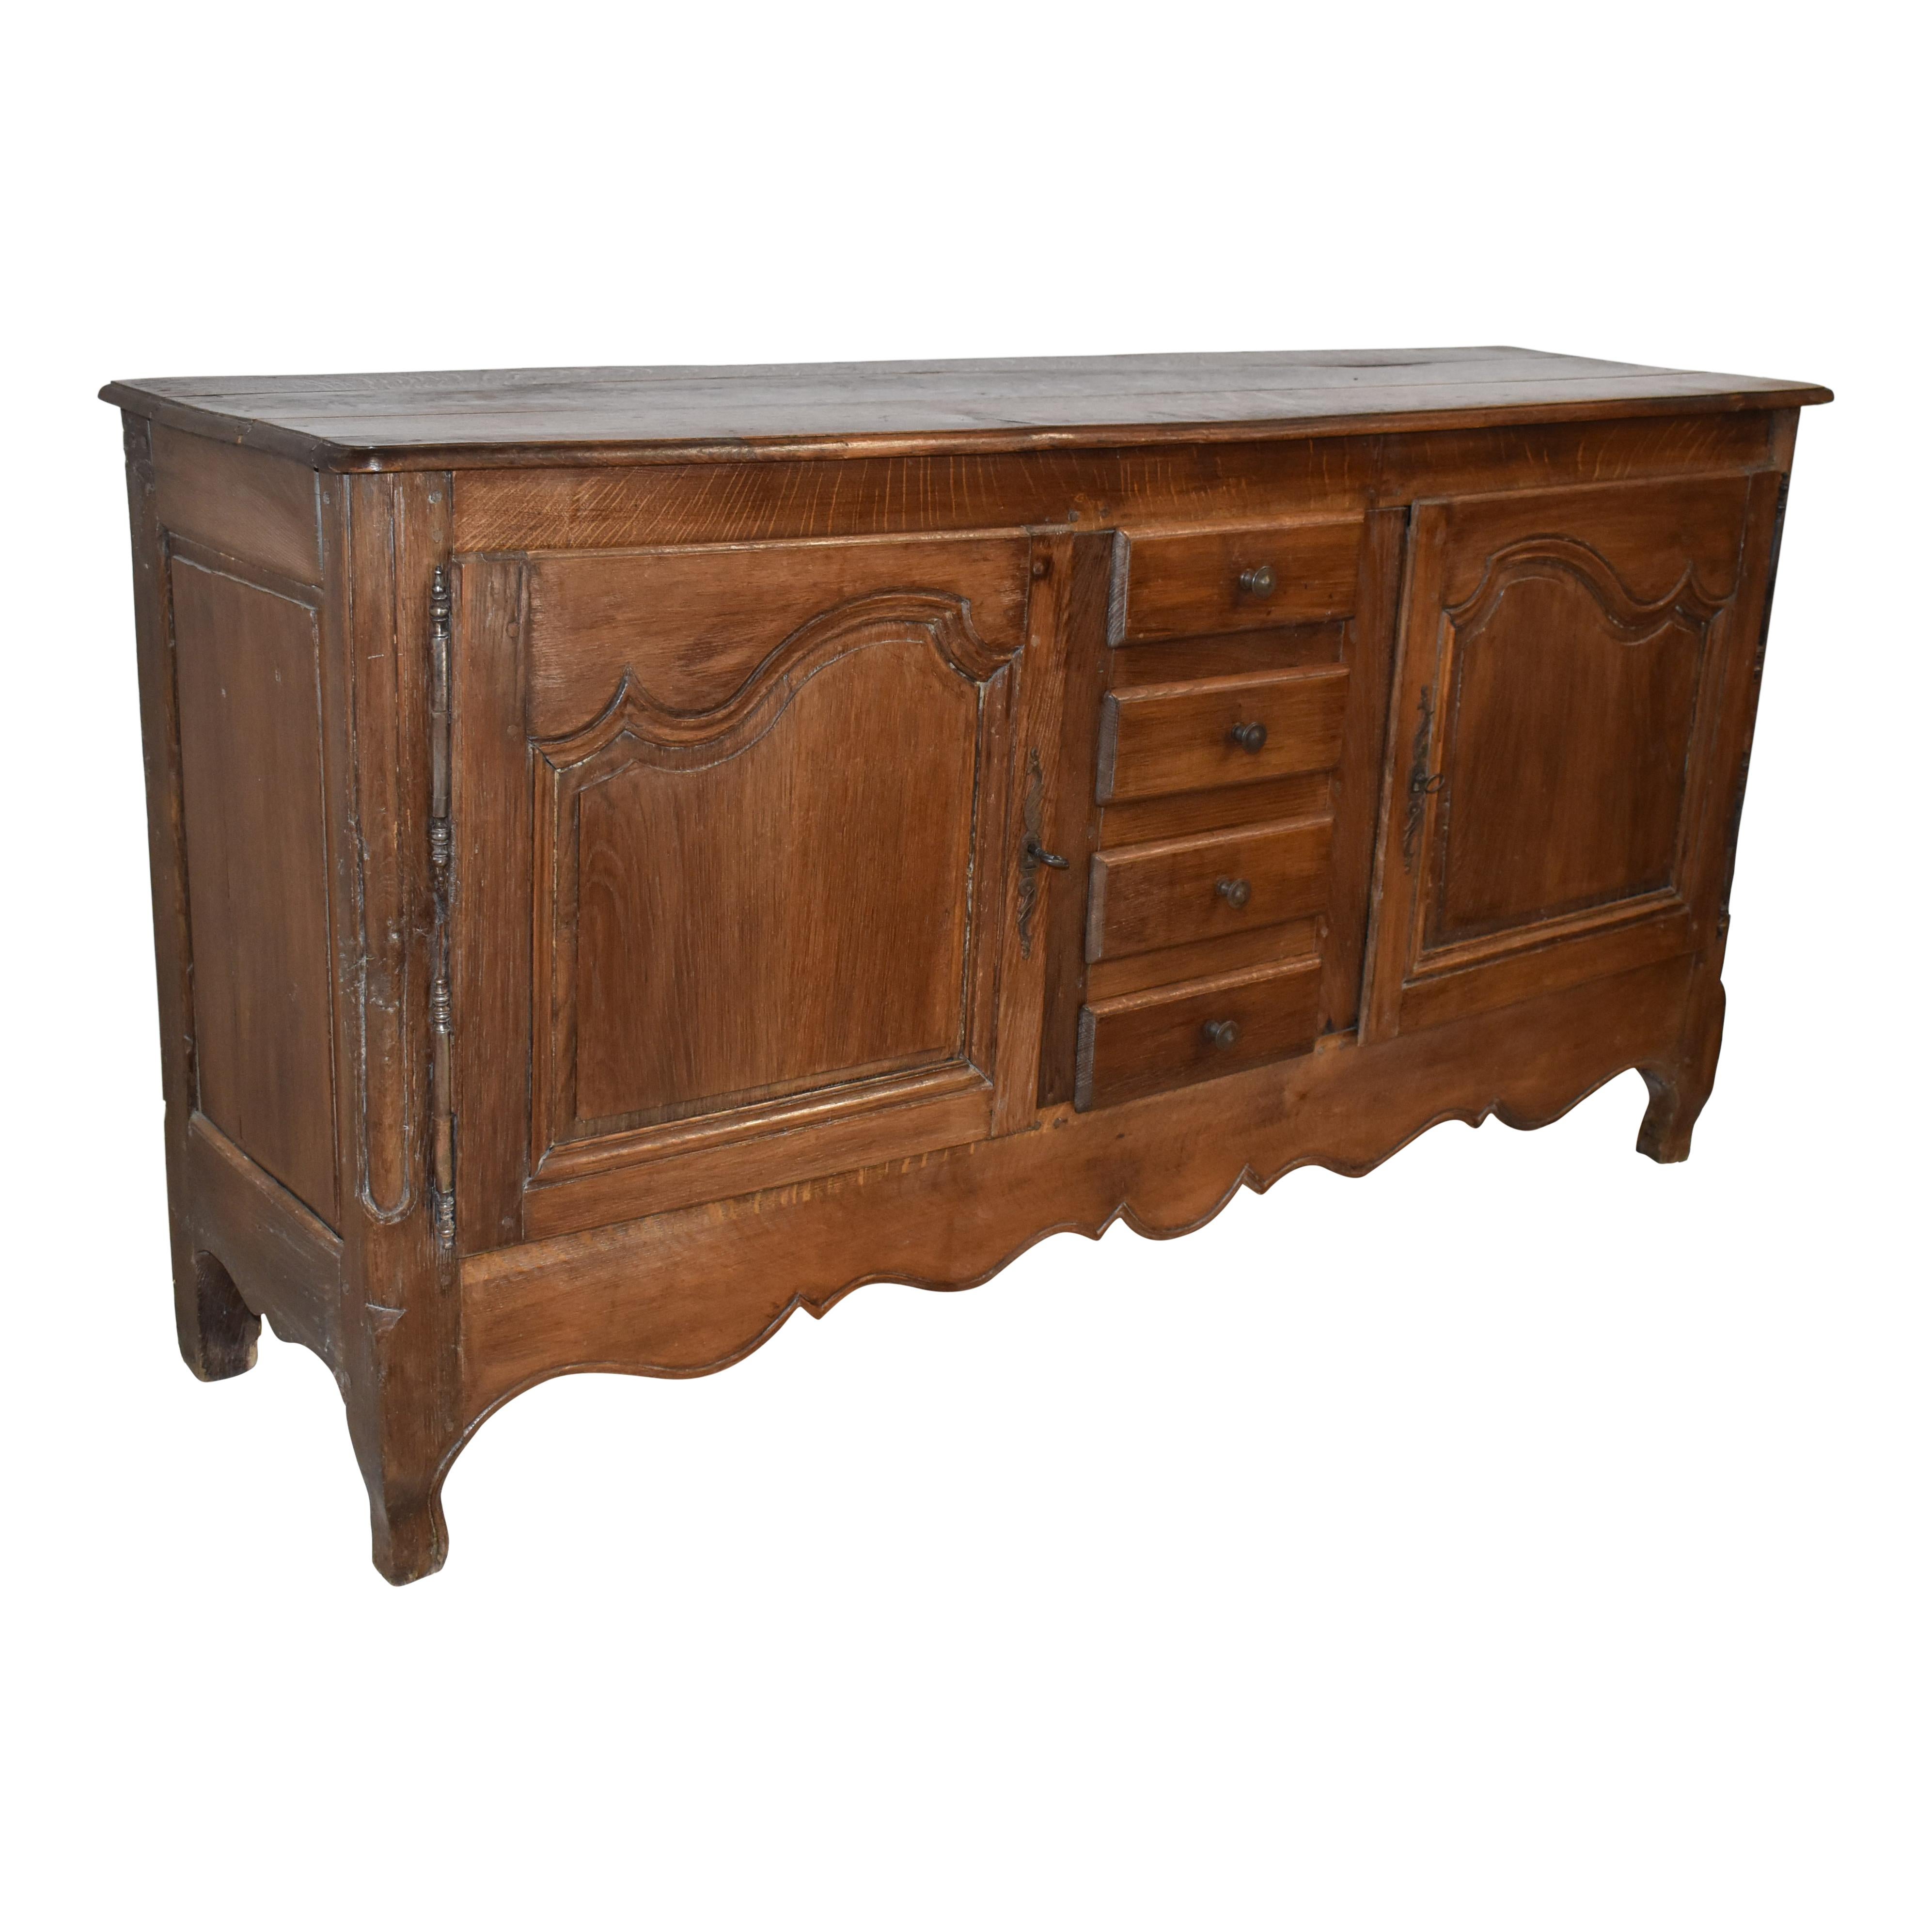 Featuring solid oak construction from the late-19th century, this six-foot sideboard pairs rustic appeal and soft, graceful lines. The graceful lines are evident in the raised panel doors that are scalloped at the top; rounded front edges on the top